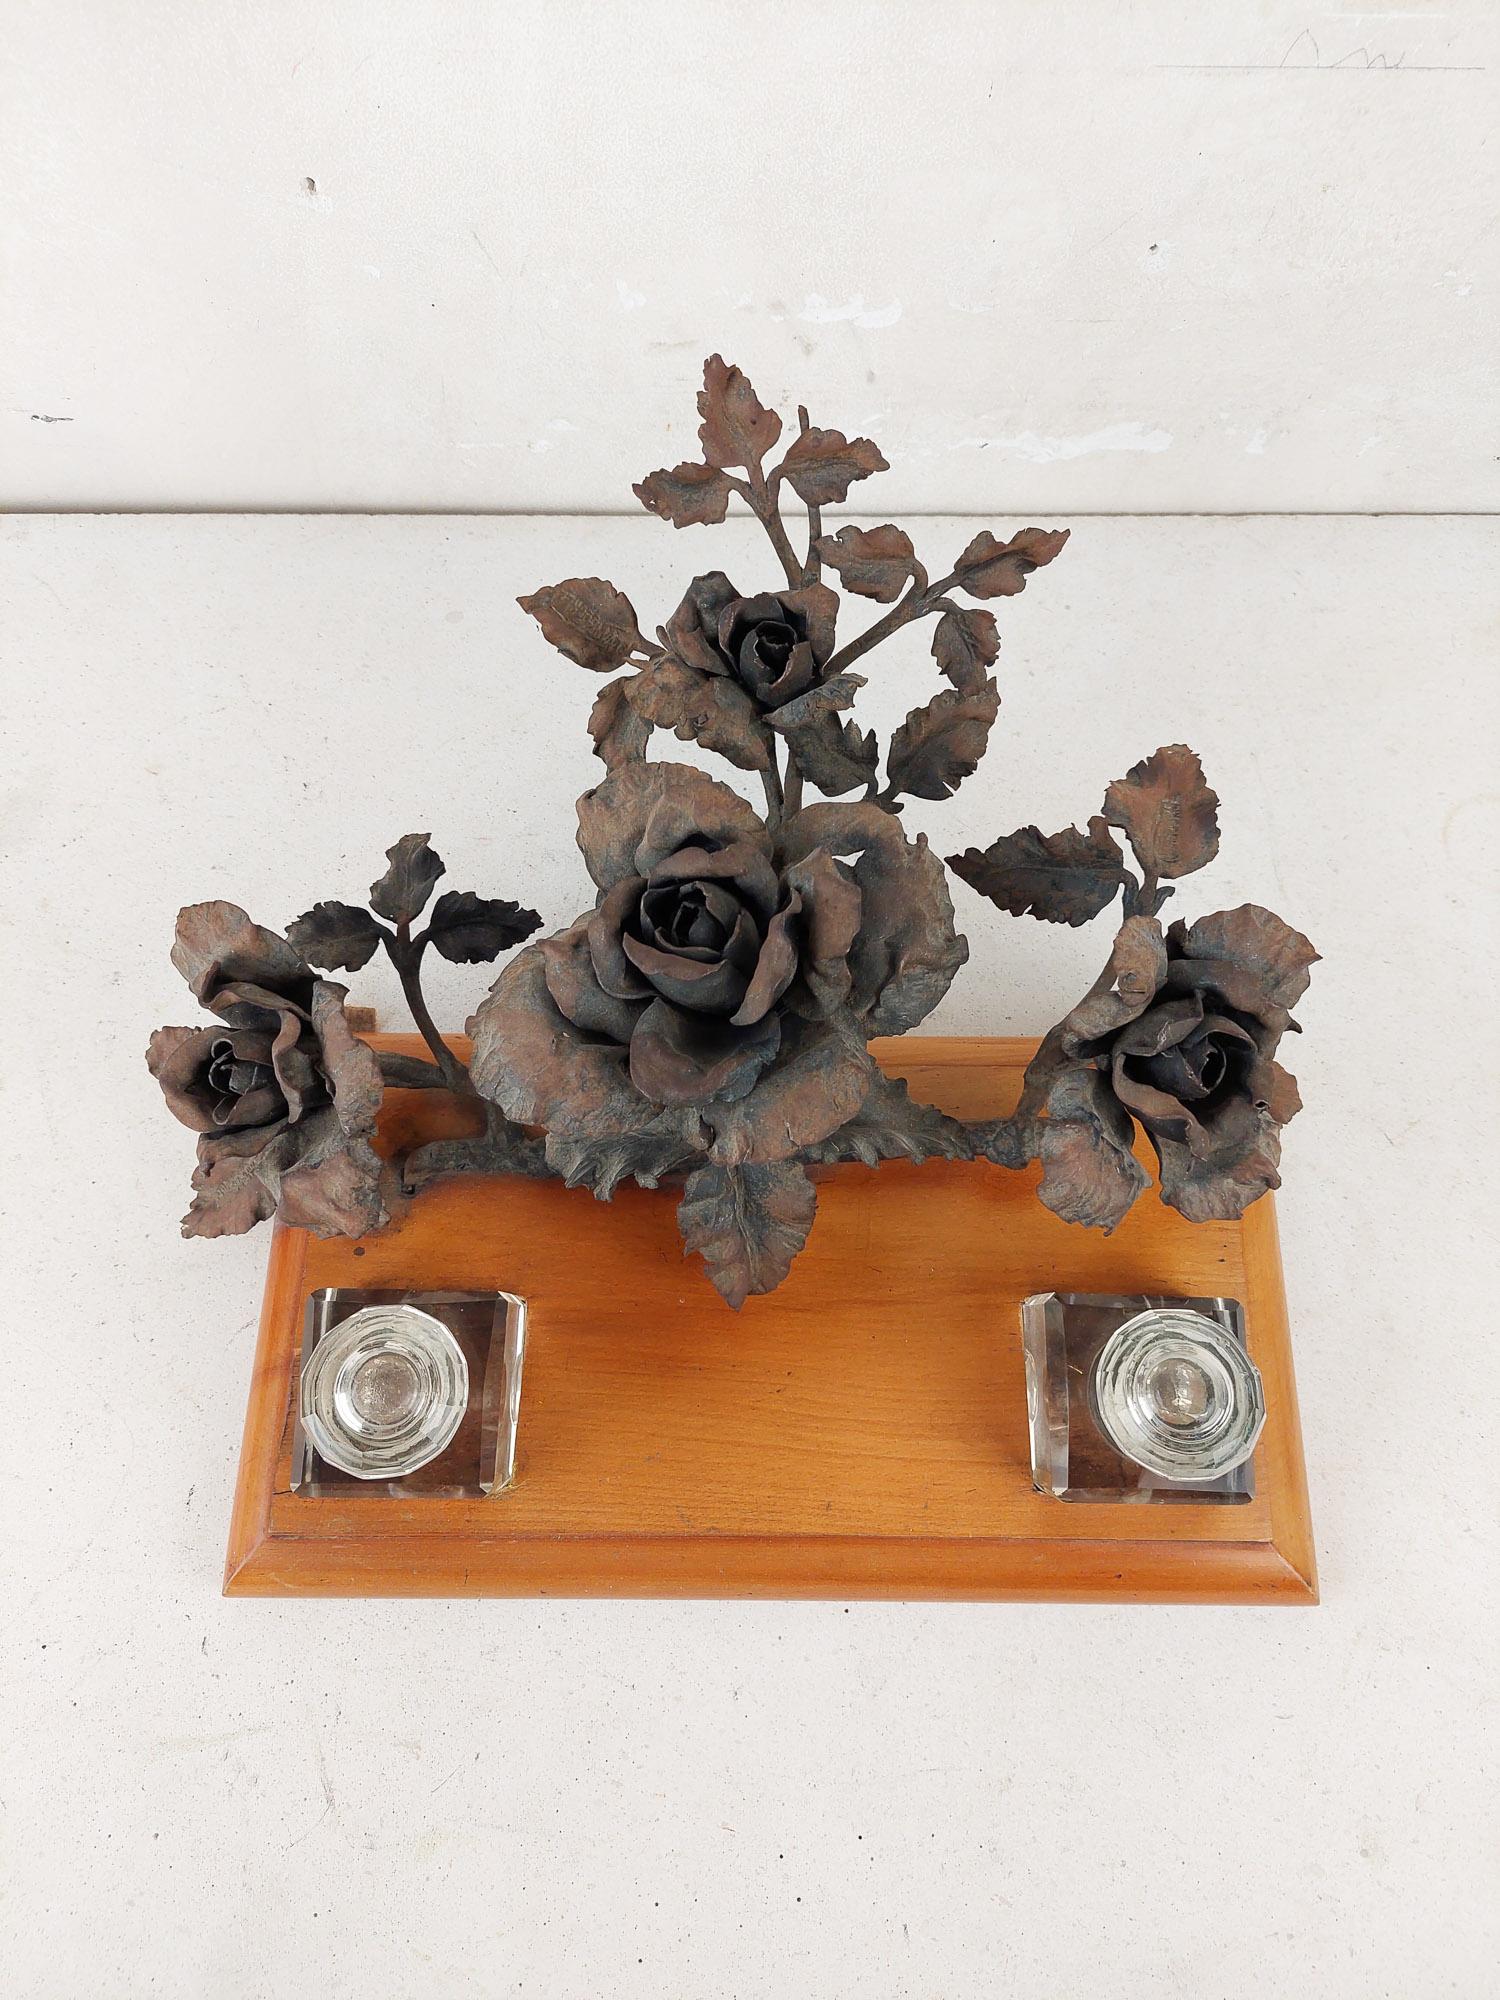 Inkwell holder with wrought iron rose bush, rose branch. Lode van Boeckel (Lodewijk, Louis) ± 1900

Ink jars possible from later date, they do not fit exactly in the holder.

35 x 30 x 19 cm

